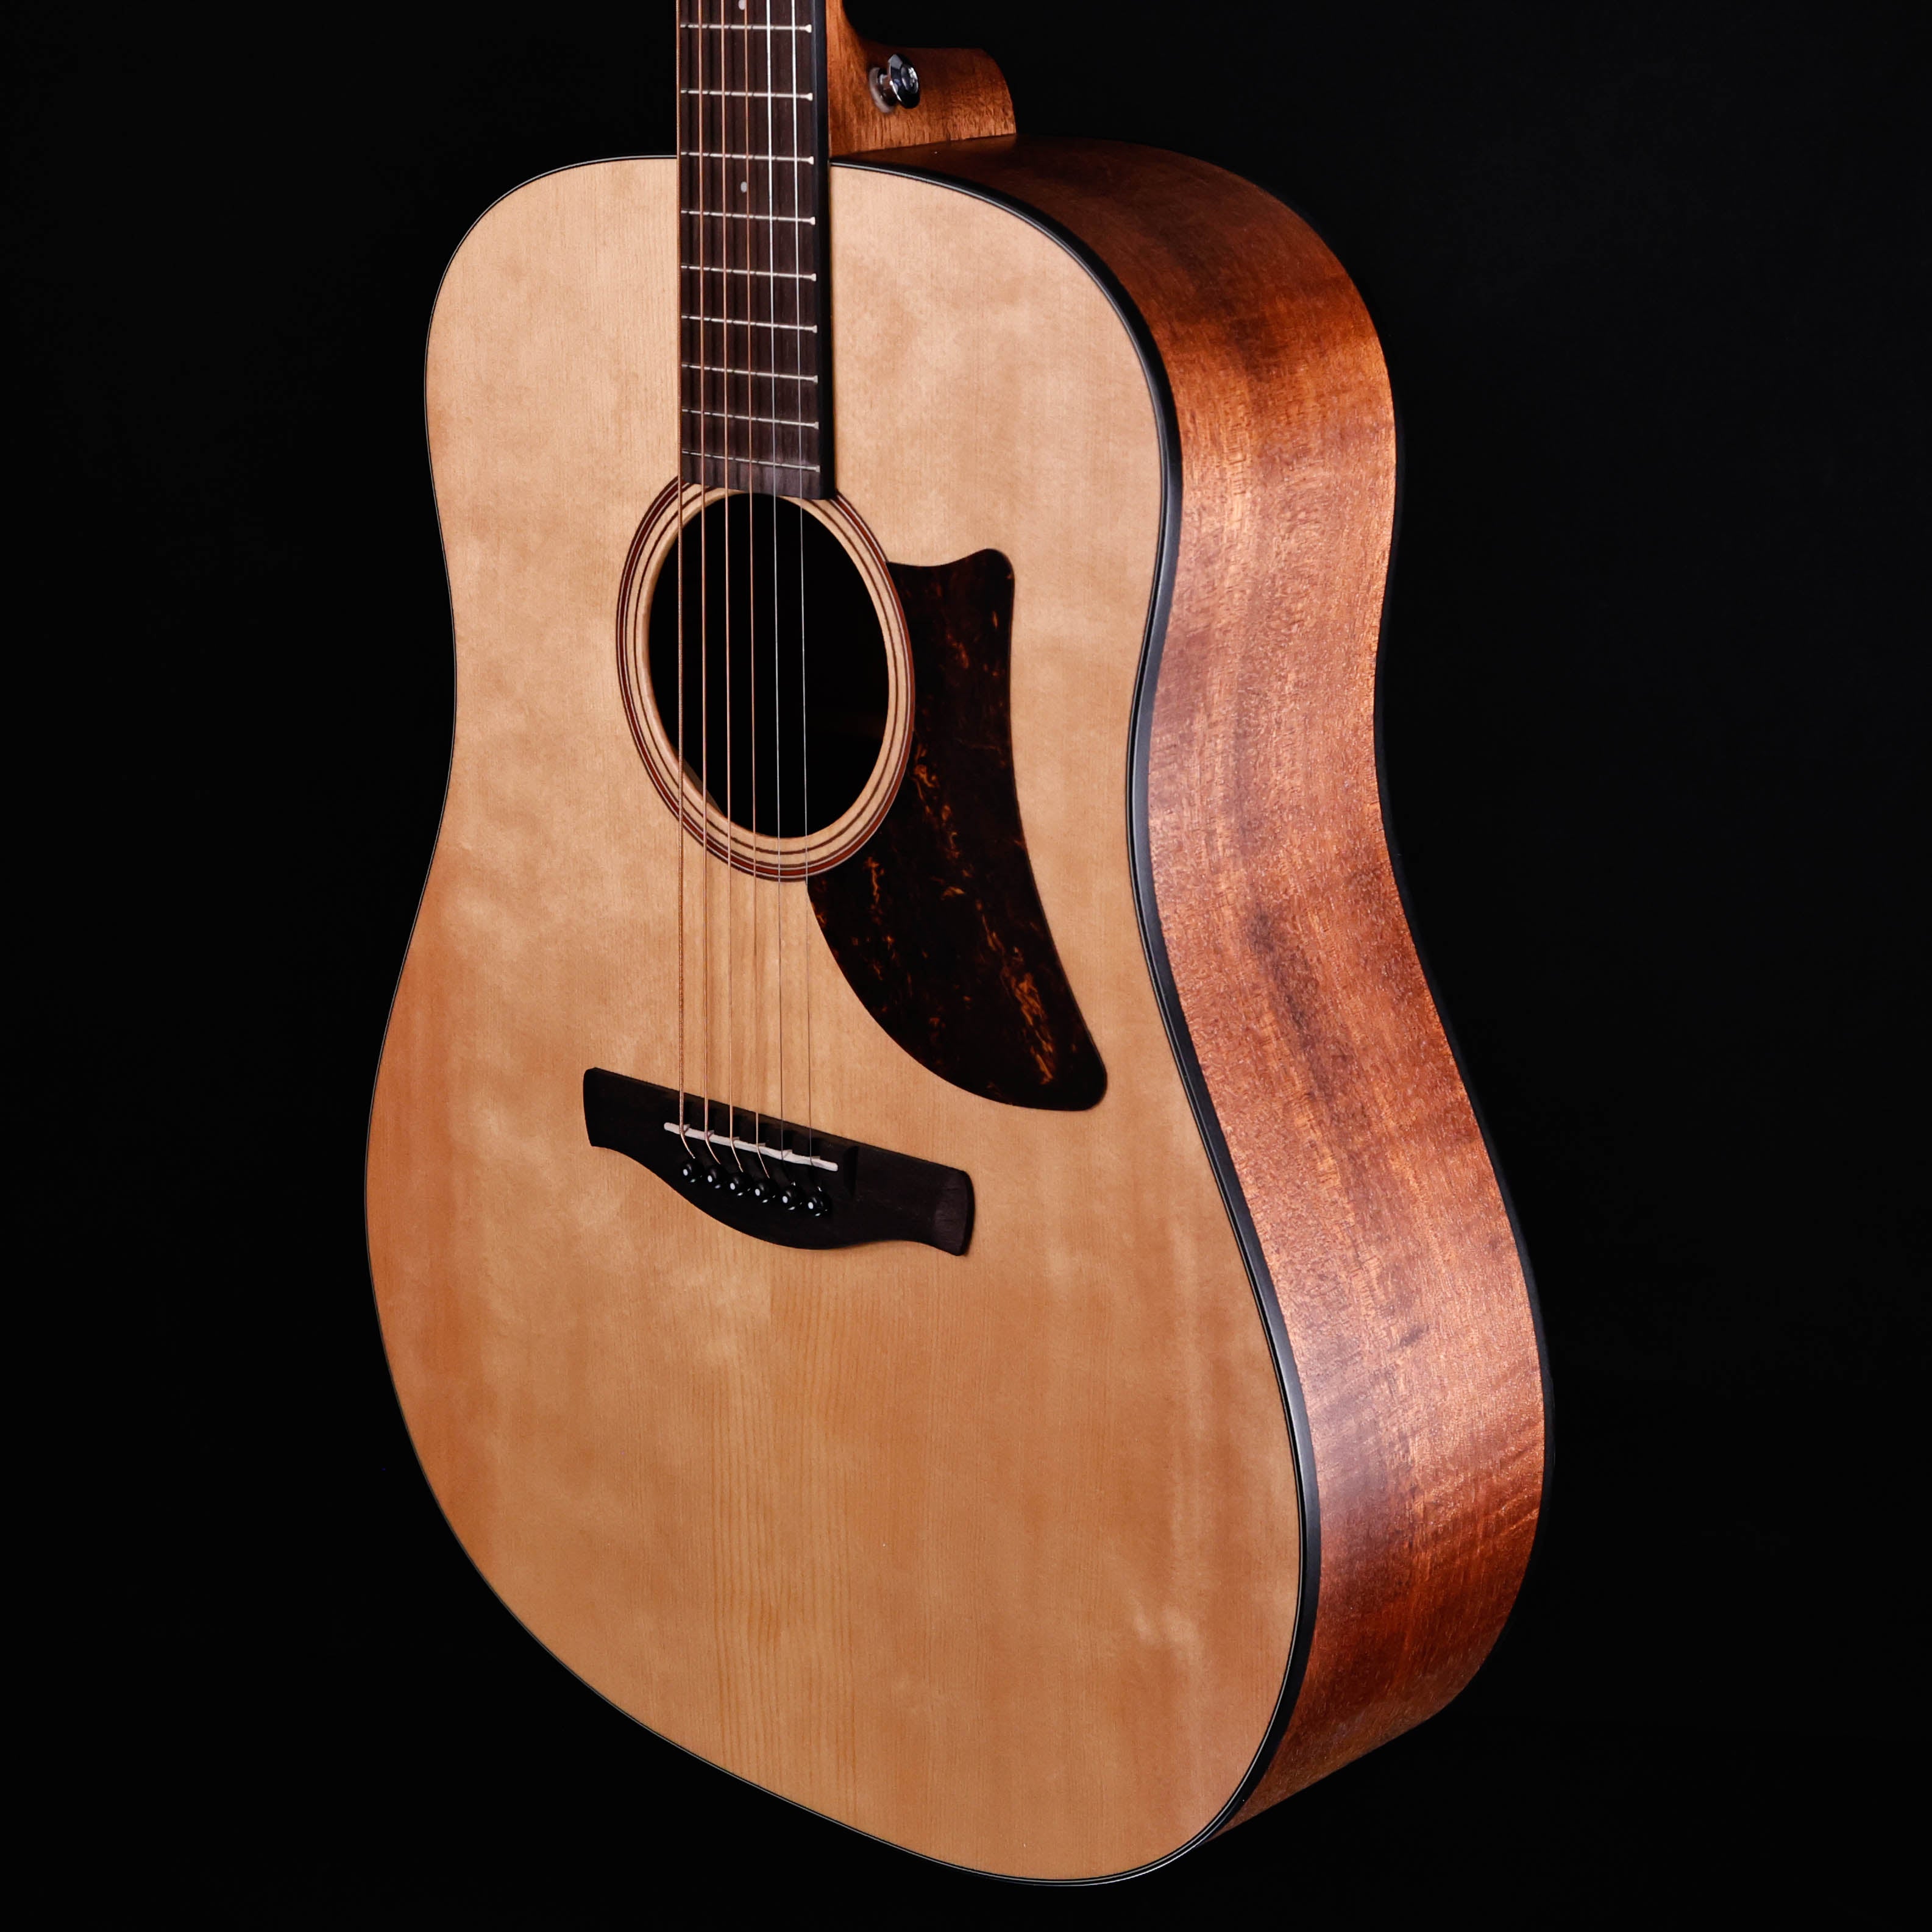 Ibanez AAD100 Acoustic, Open Pore Natural 4lbs 2oz